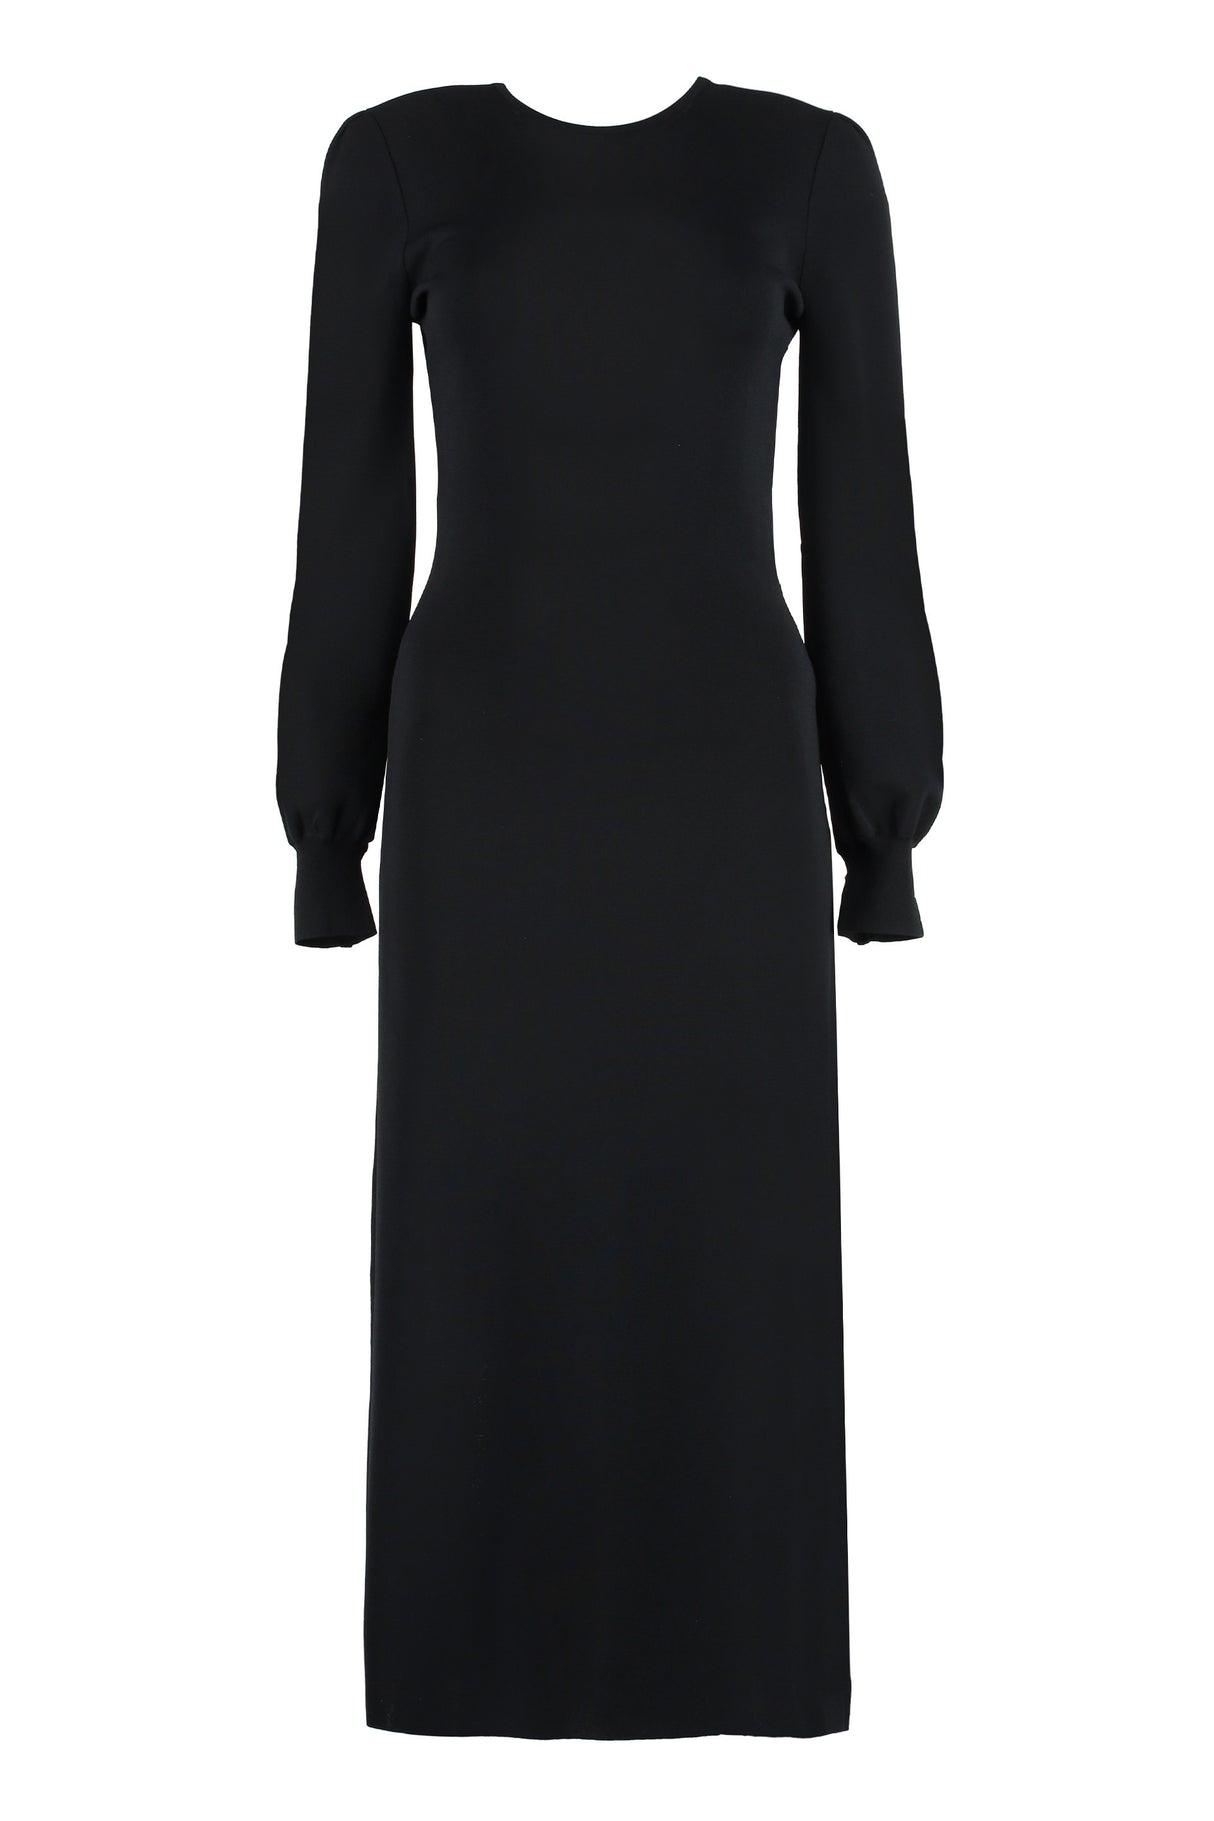 GUCCI Black Viscose Dress for Women - SS23 Collection